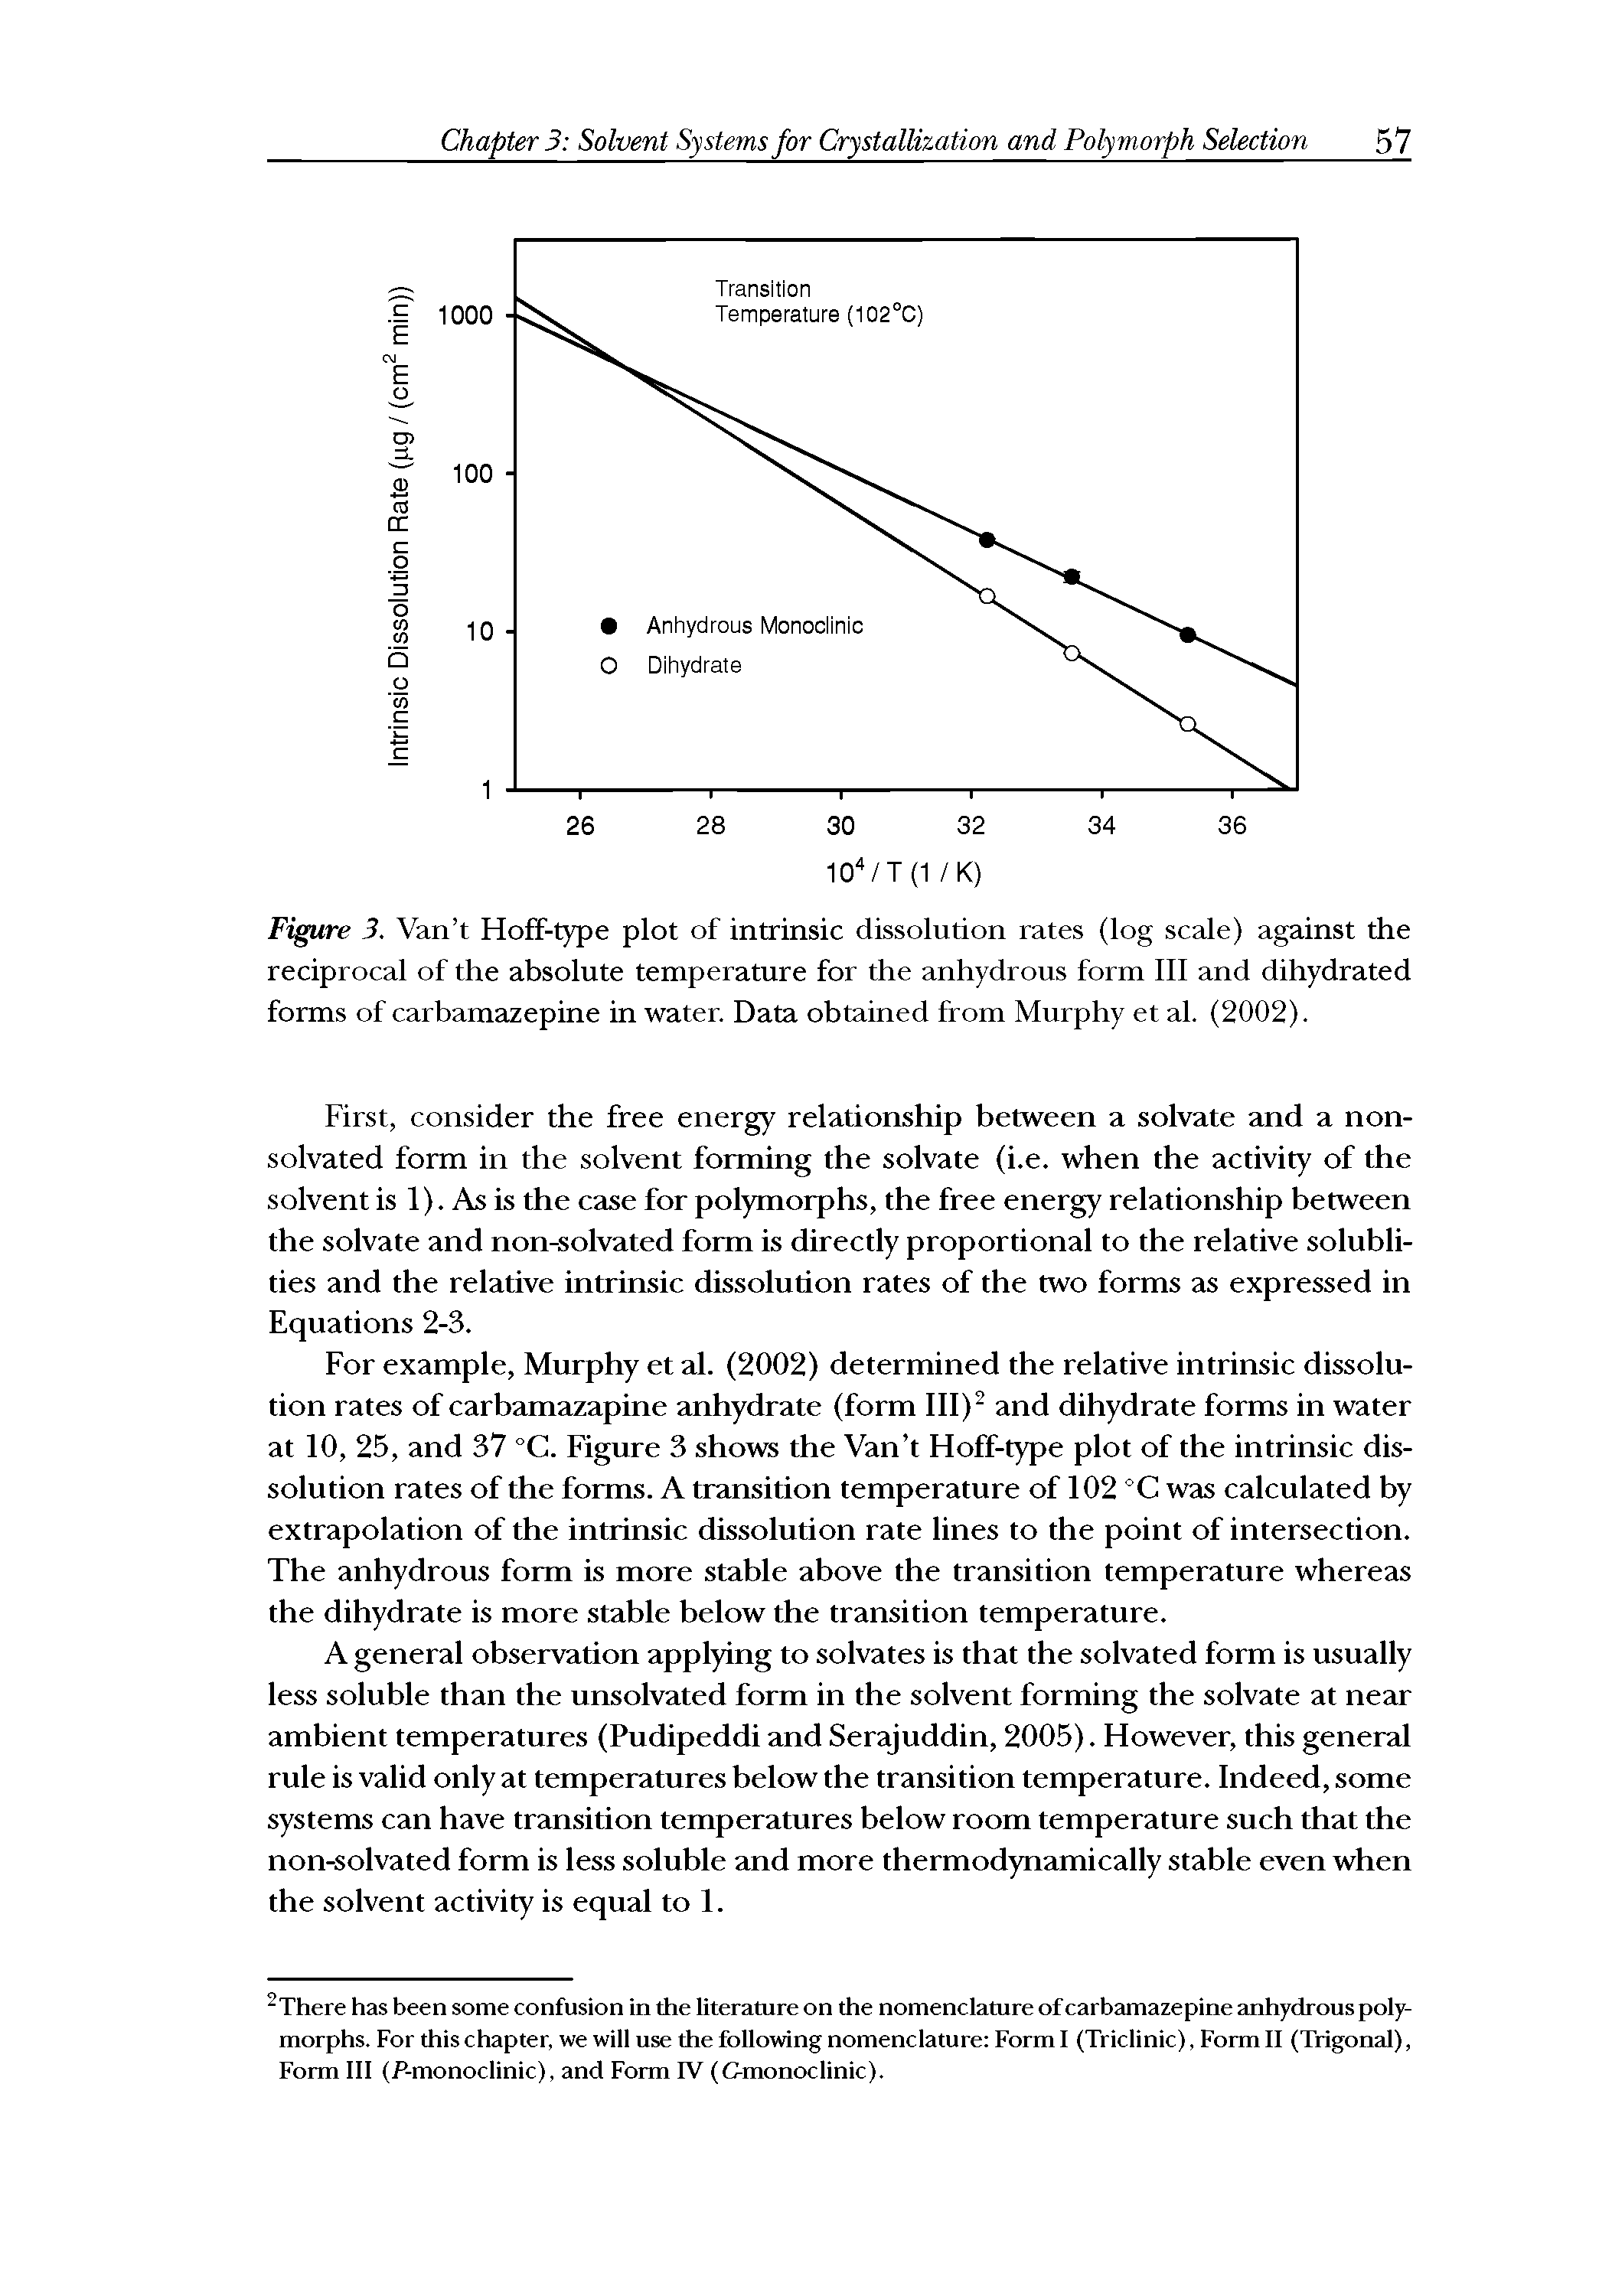 Figure 3. Van t Hoff-type plot of intrinsic dissolution rates (log scale) against the reciprocal of the absolute temperature for the anhydrous form 111 and dihydrated forms of carbamazepine in water. Data obtained from Murphy et al. (2002).